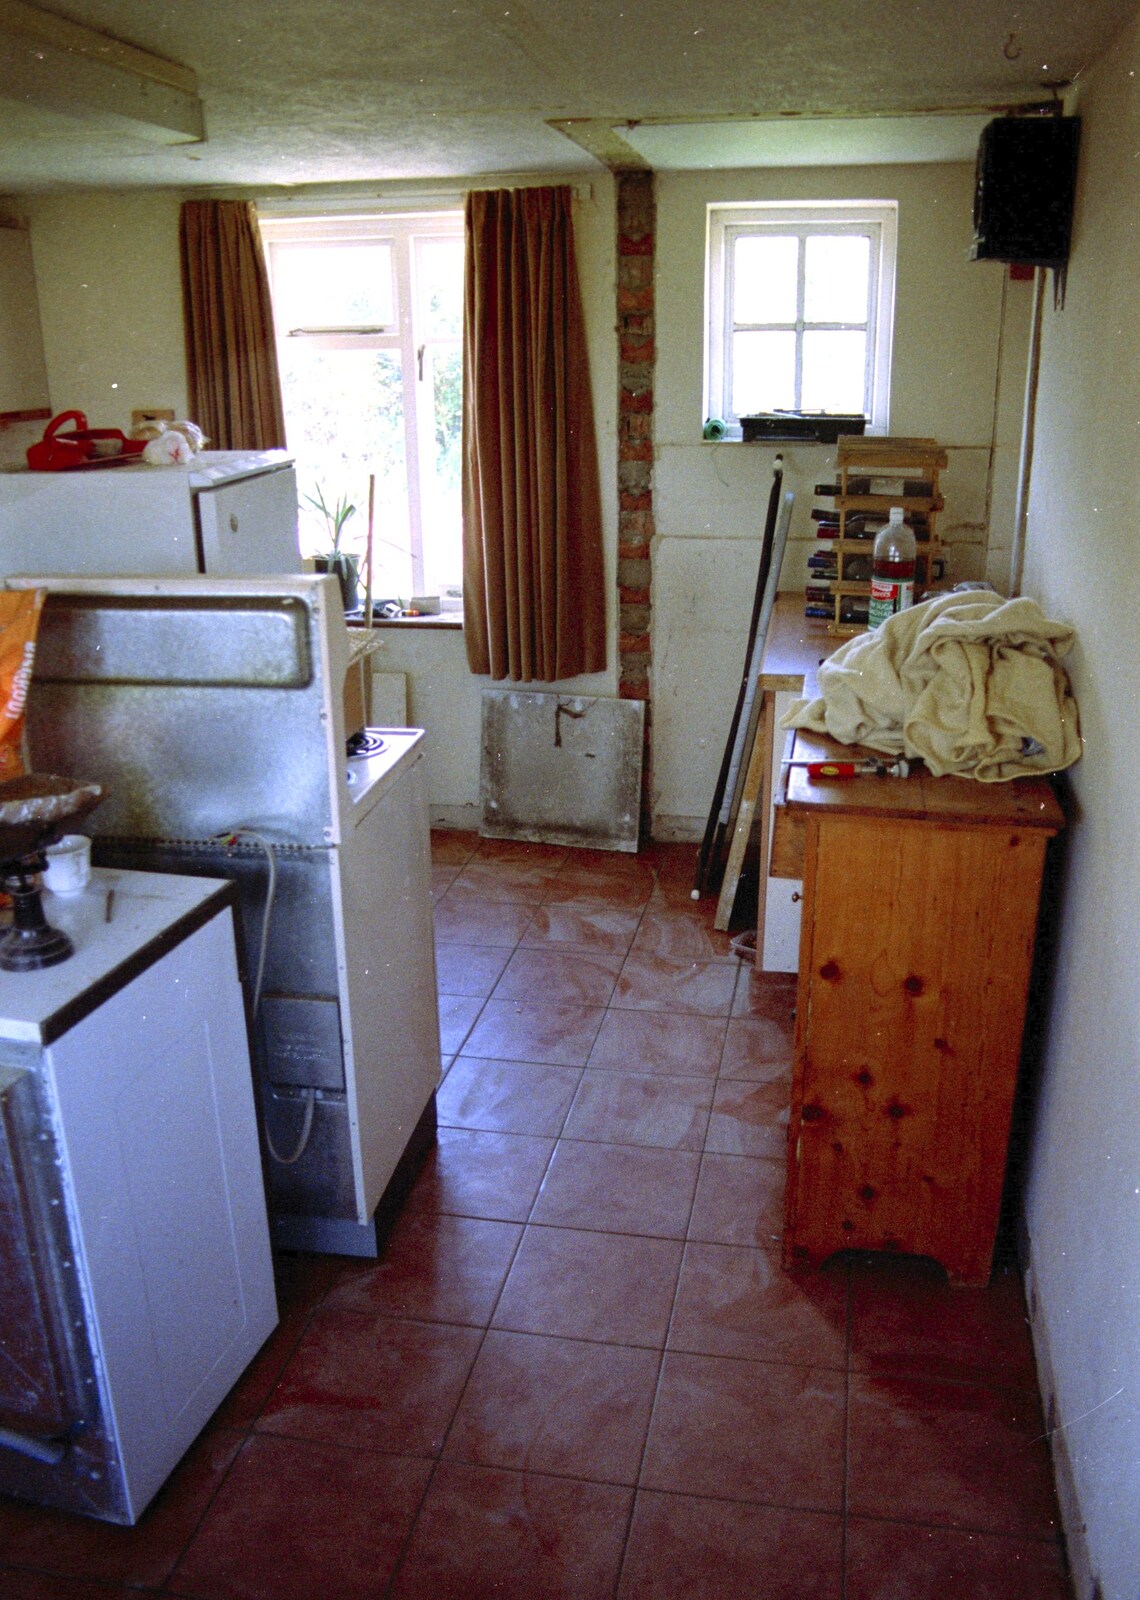 The kitchen has new tiles from Garden Rotovator Action, Brome, Suffolk - 28th March 1998